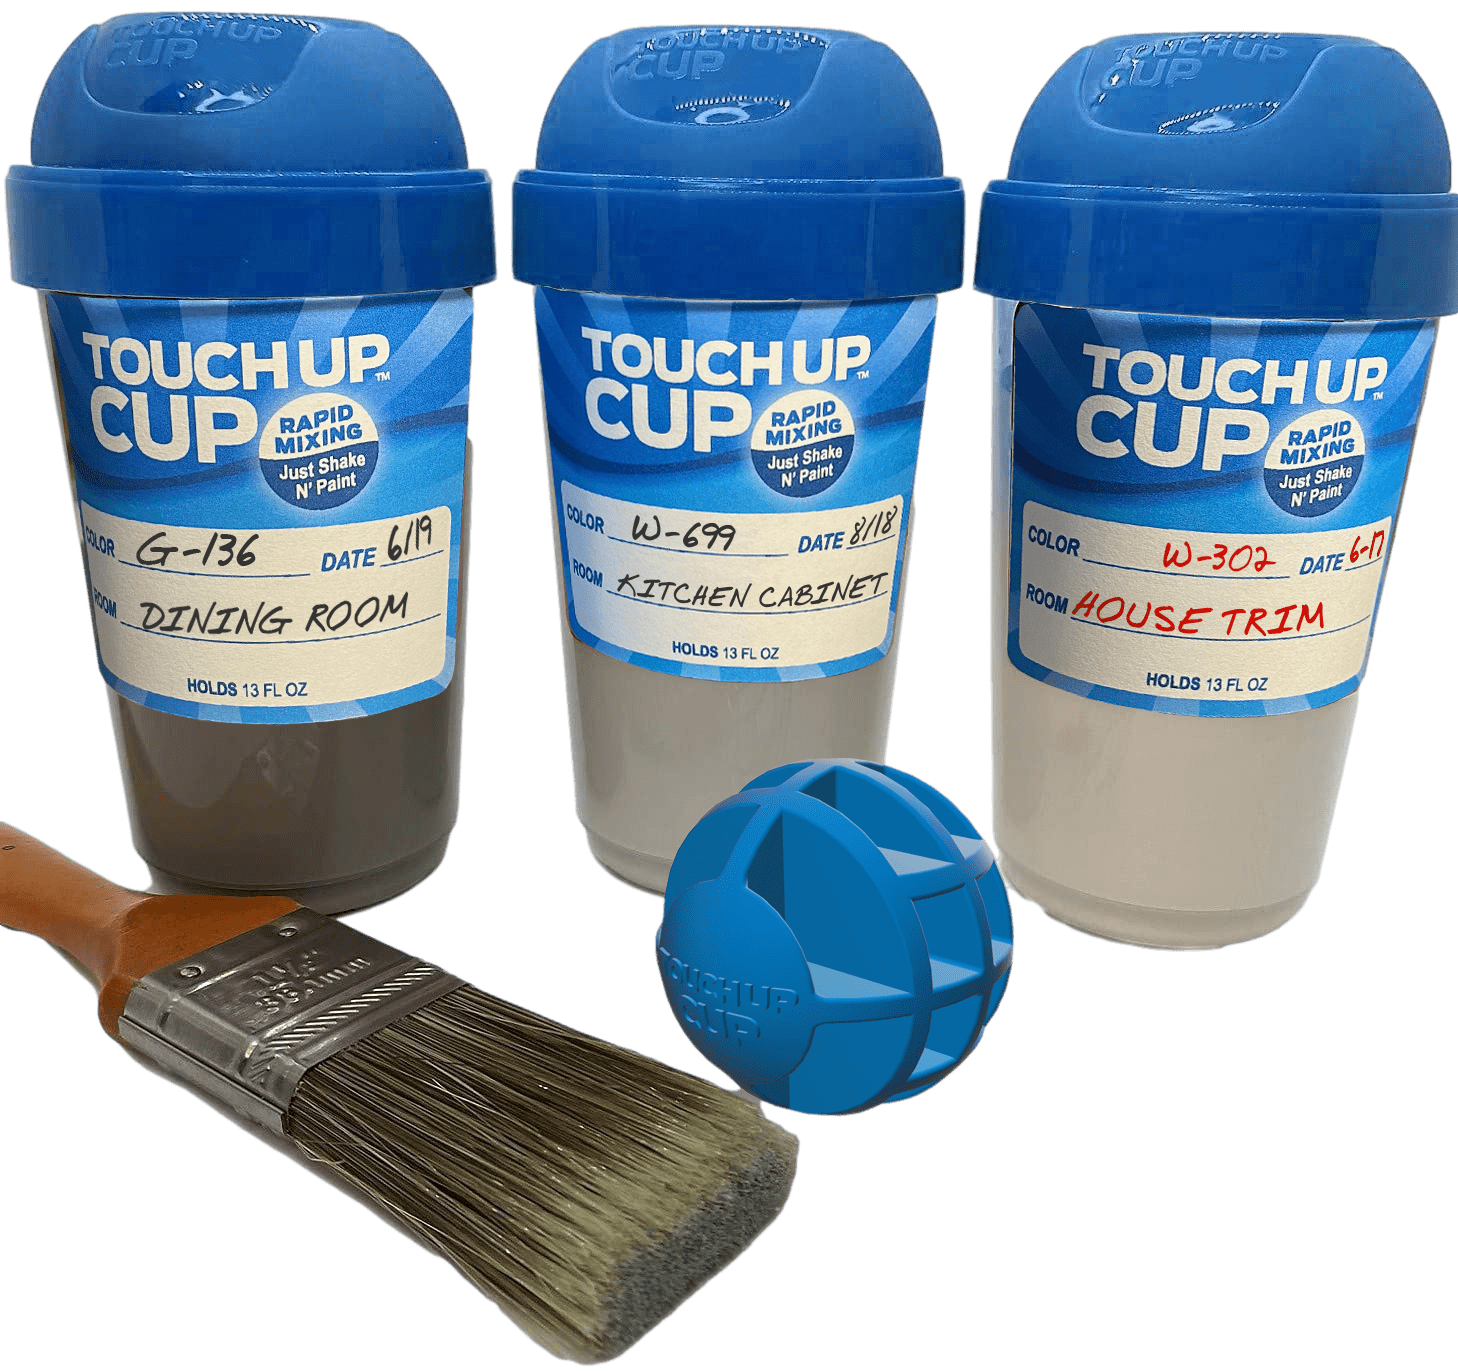 Touch Up Cup  Kalamazoo MI